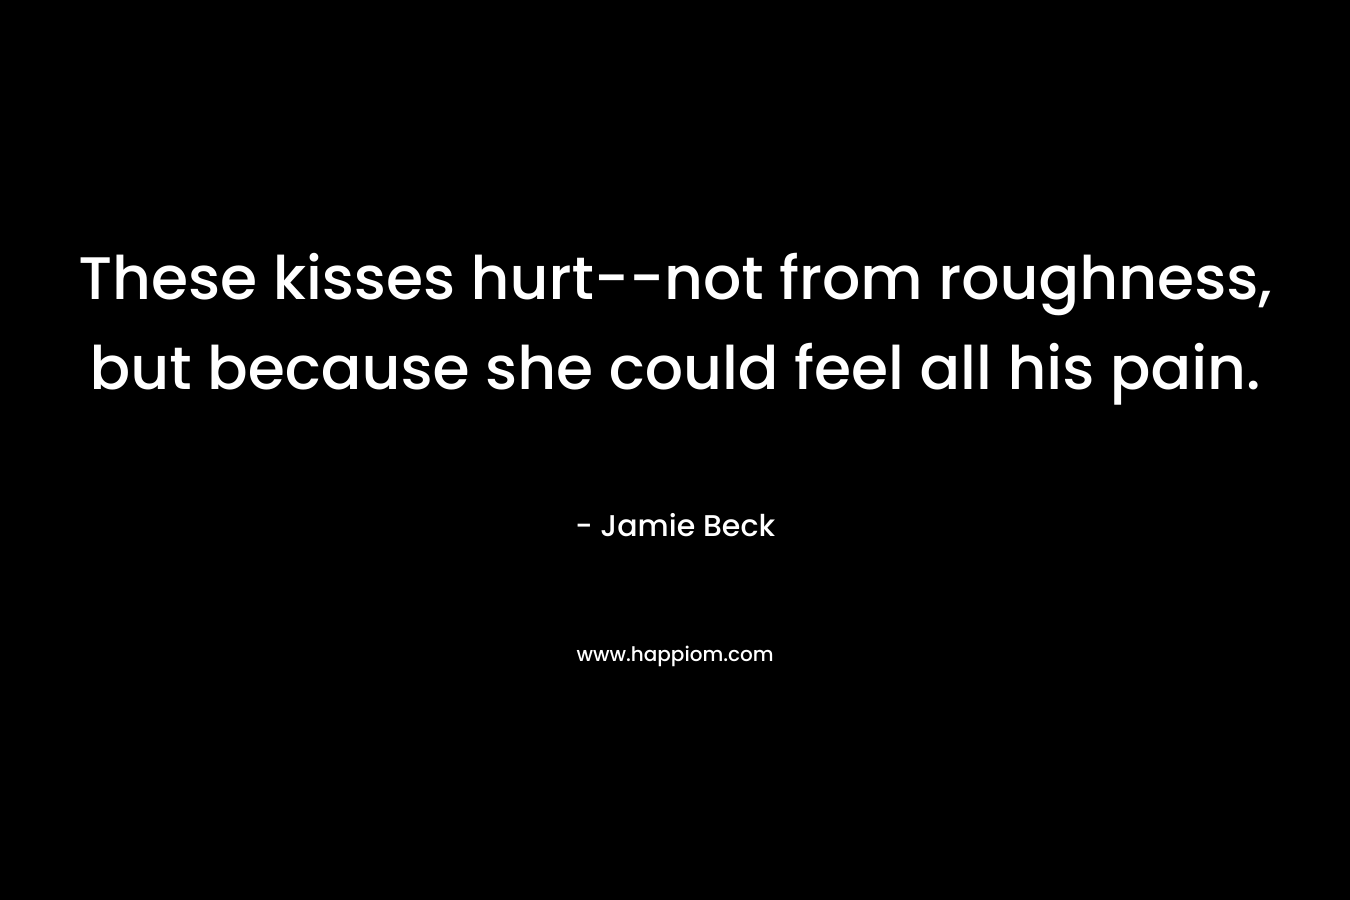 These kisses hurt--not from roughness, but because she could feel all his pain.